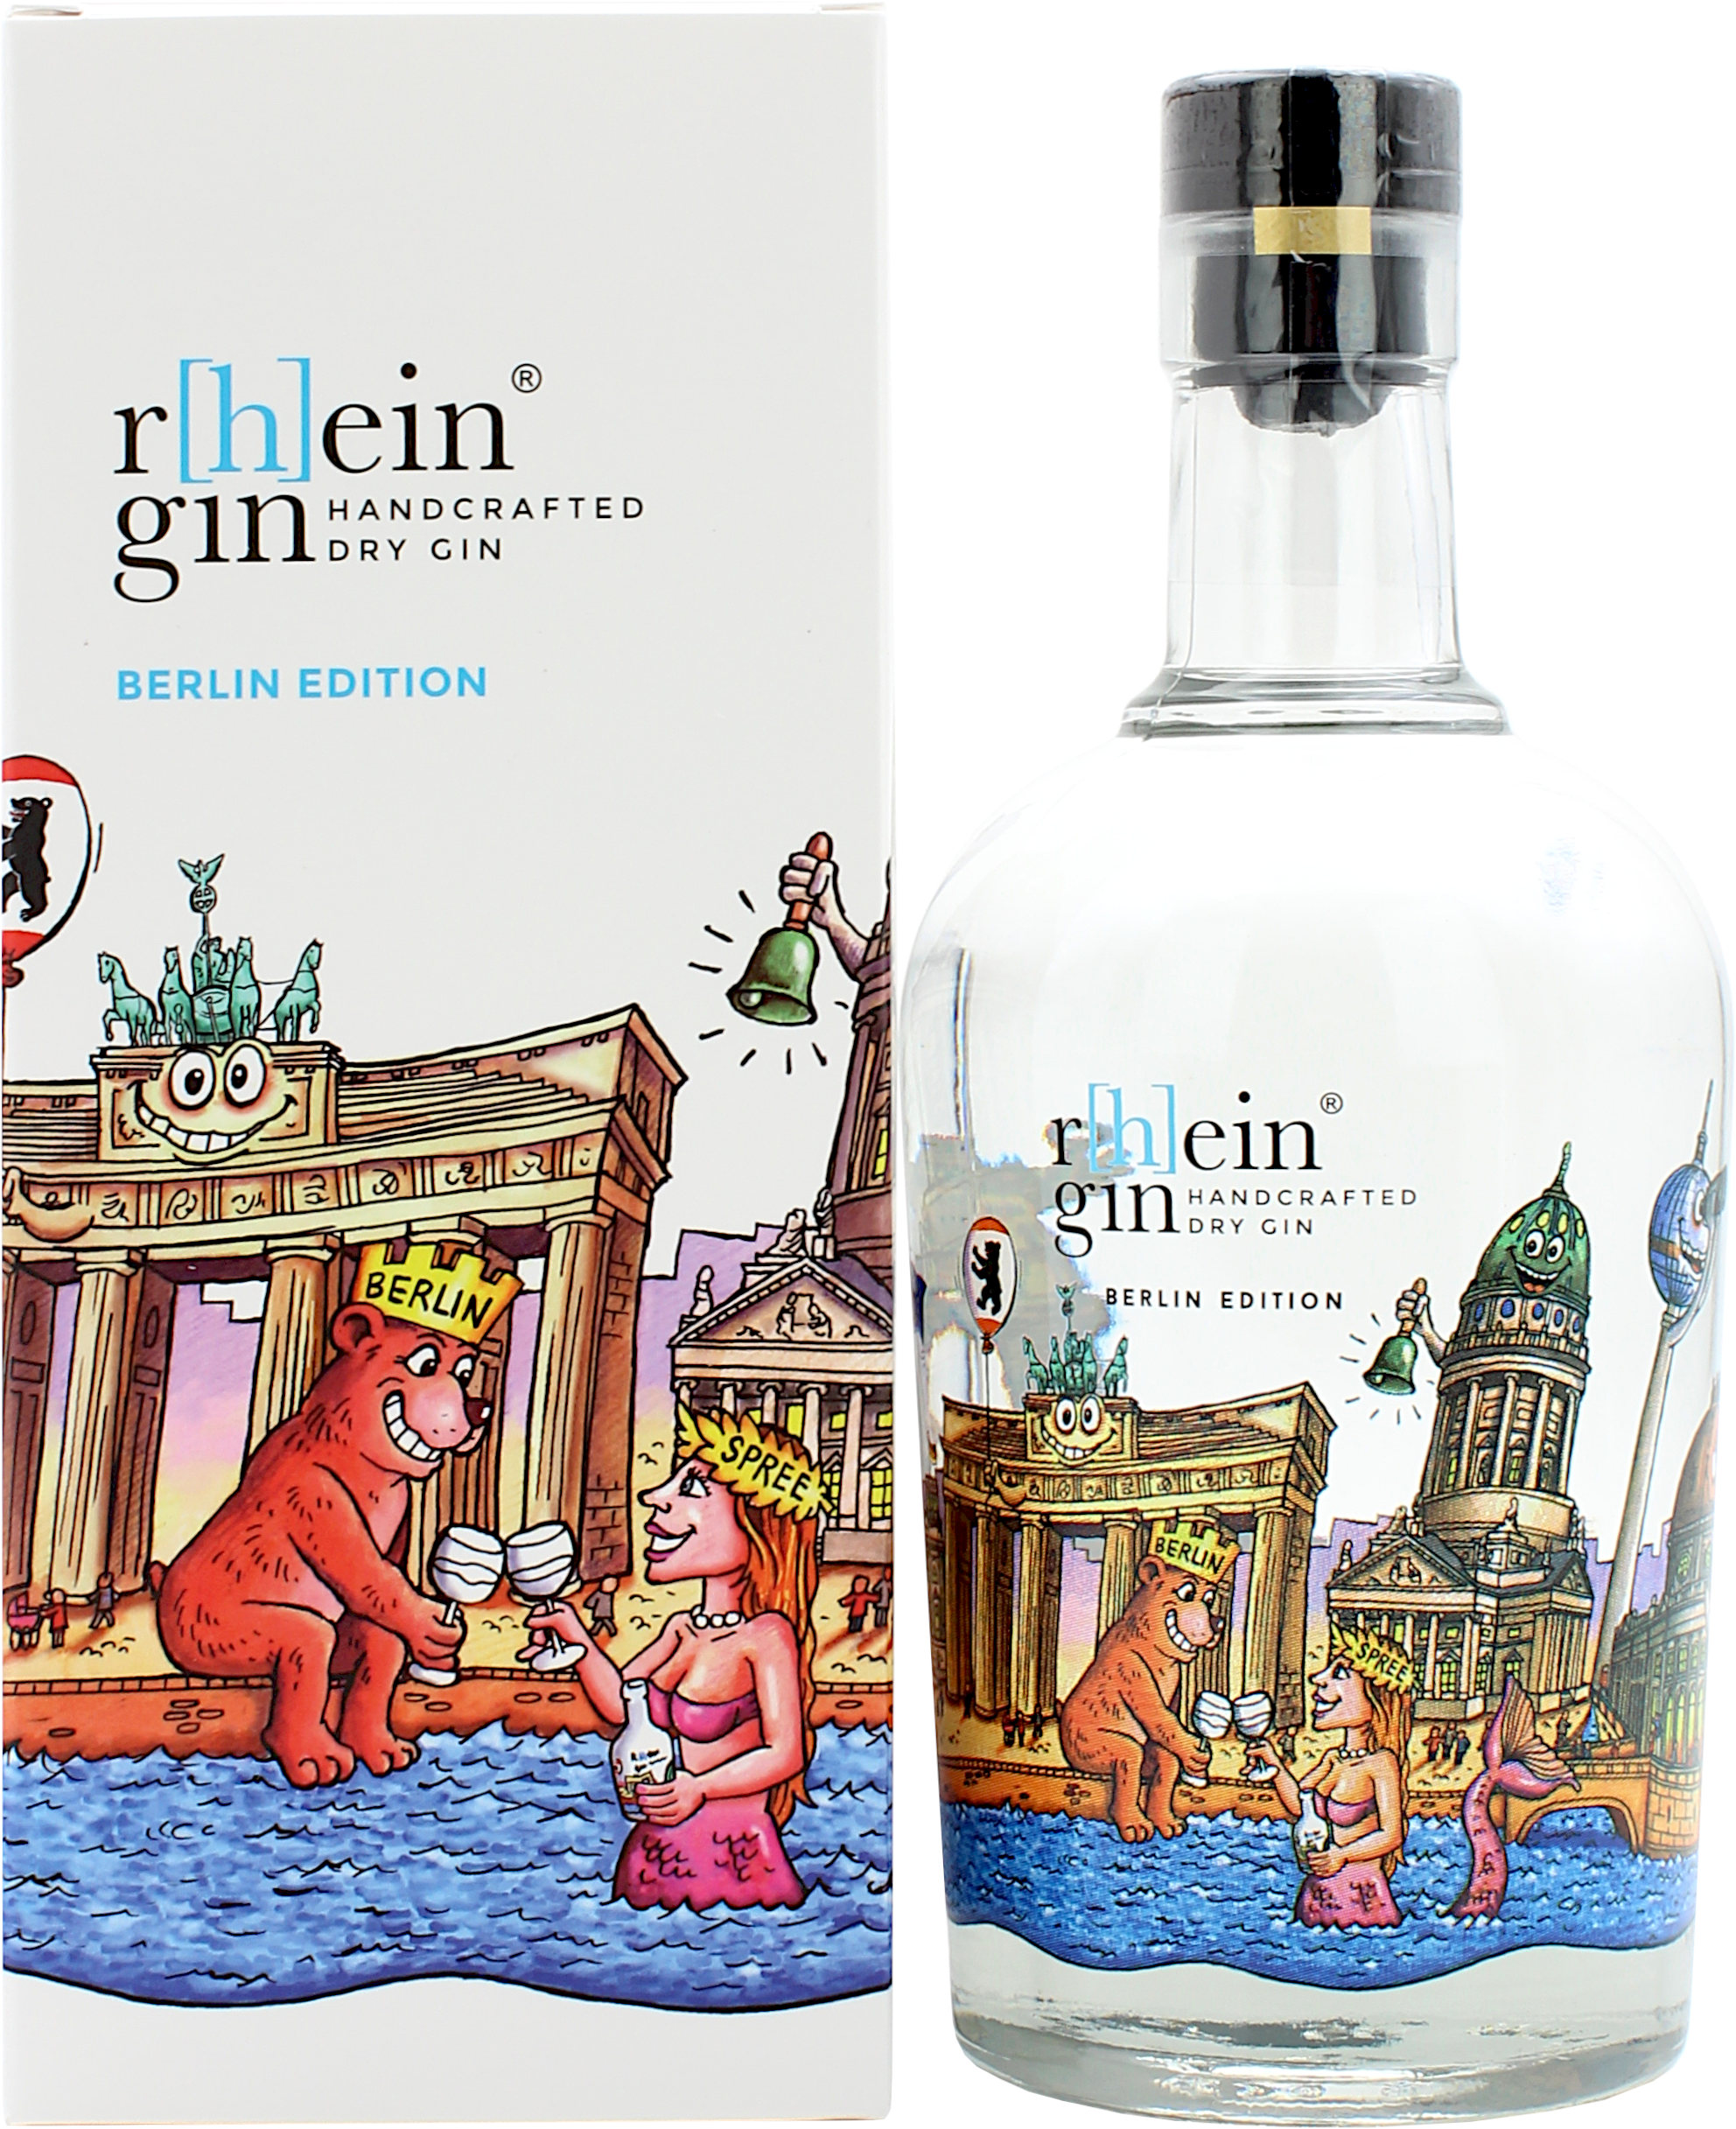 r(h)eingin Berlin Edition by Jacques Tilly in Geschenkpackung 46.0% 0,5l